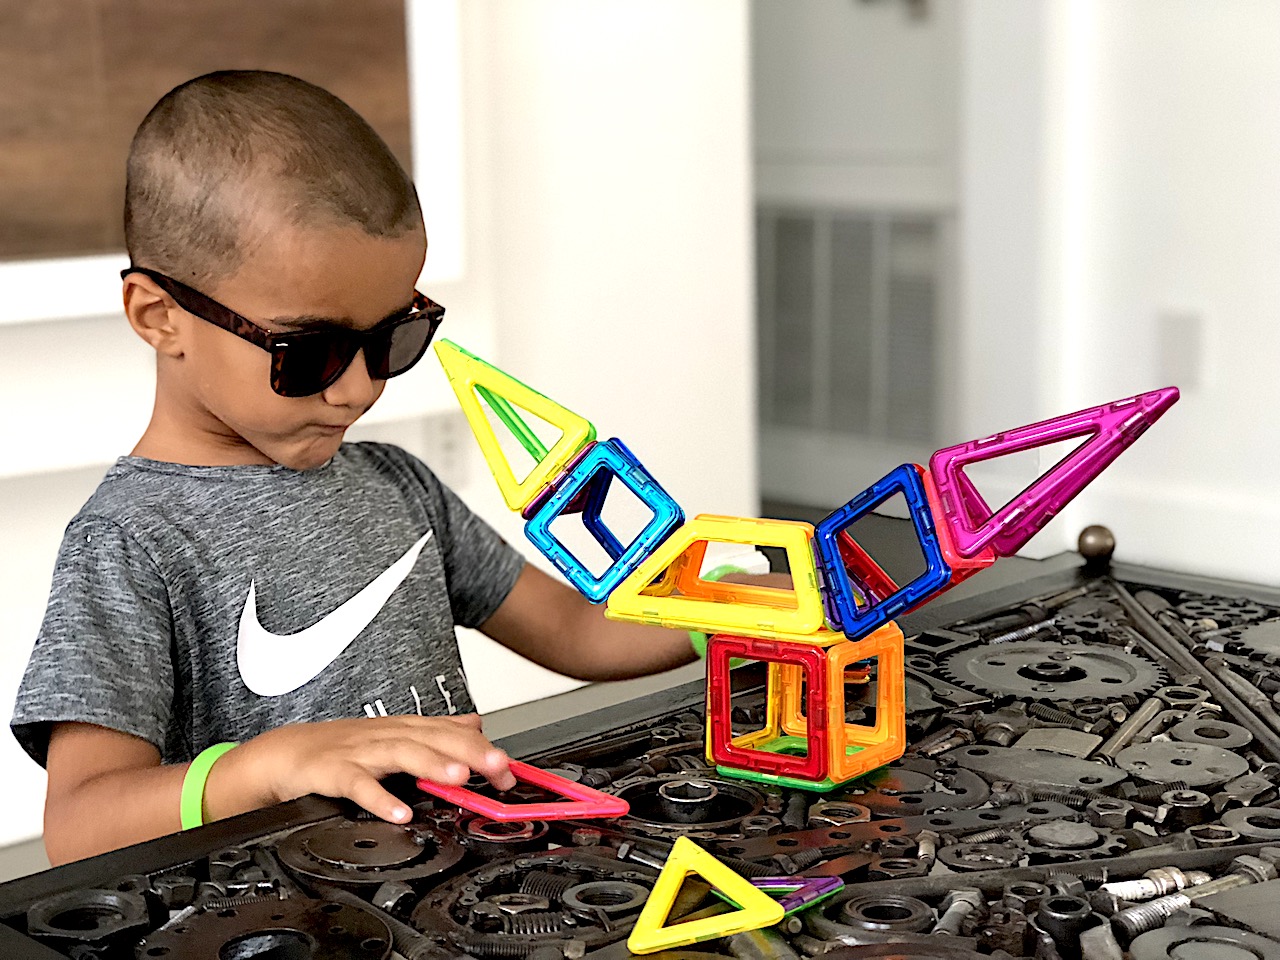 Magformers - Best STEM toy for children of all ages #Magformers #STEM #STEMToys #BestToy #AwardWinning